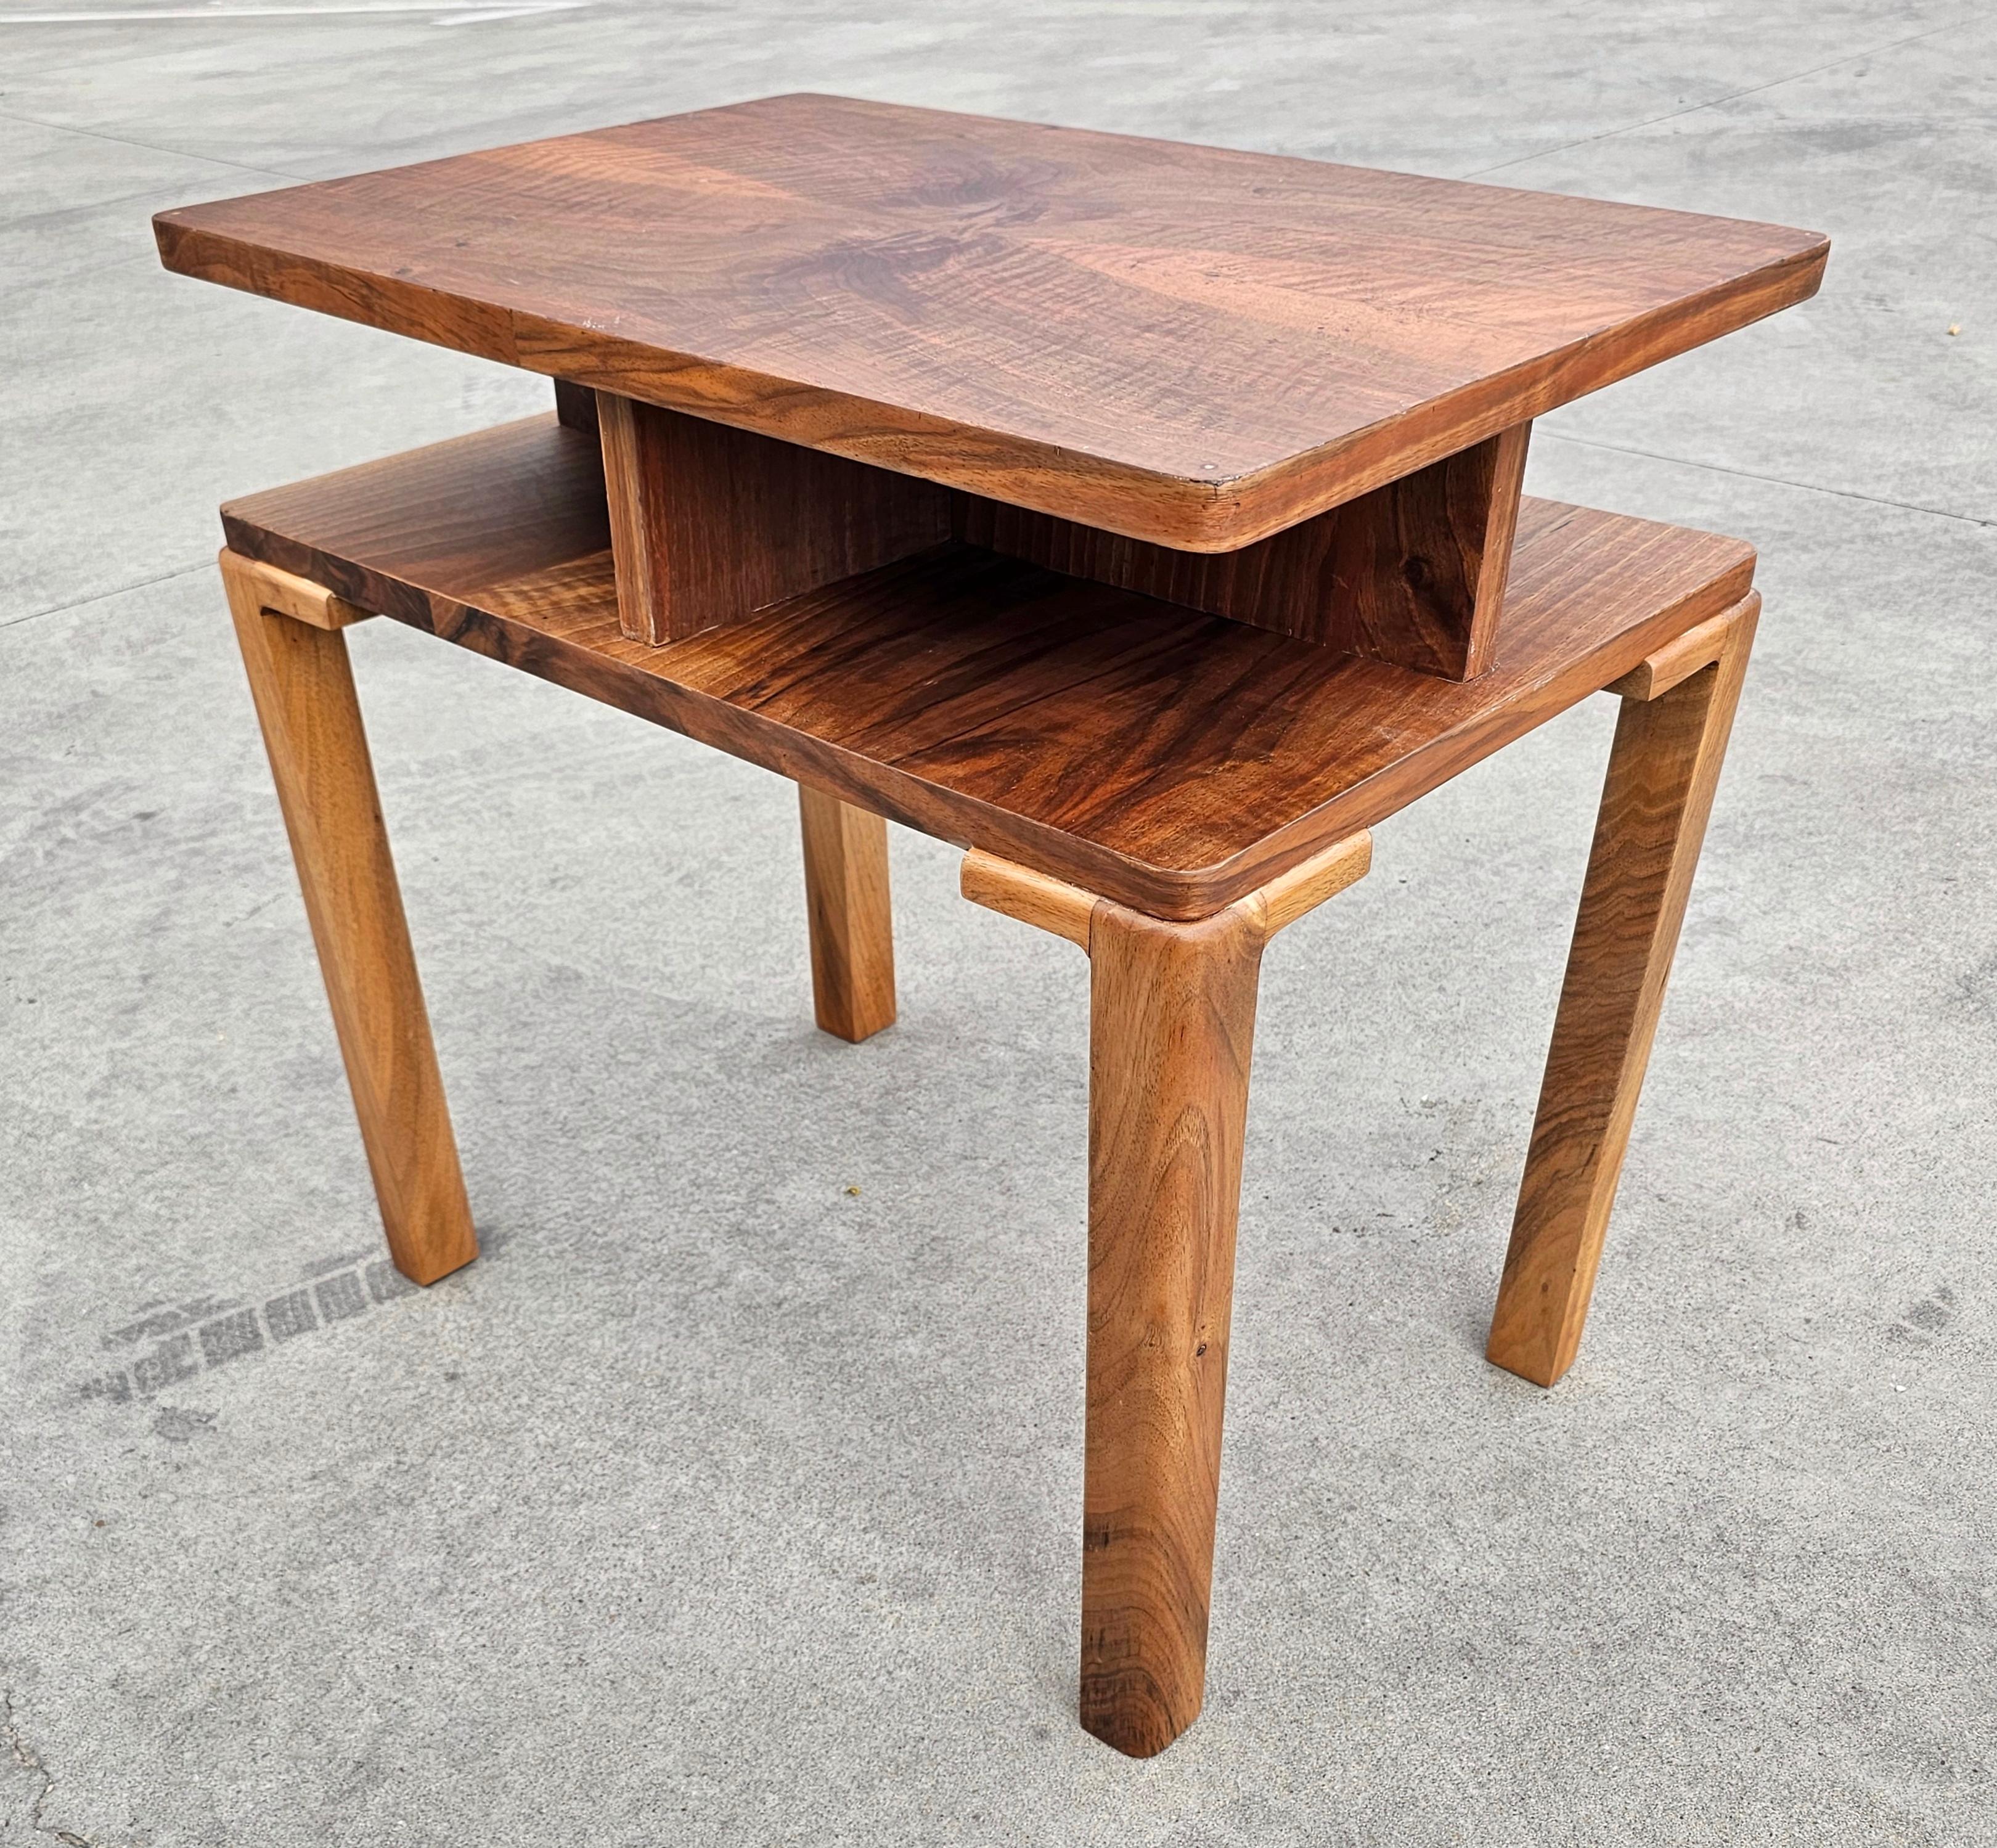 Rectangular Two Tiered Art Deco Walnut Side Table, Austria 1930s For Sale 4